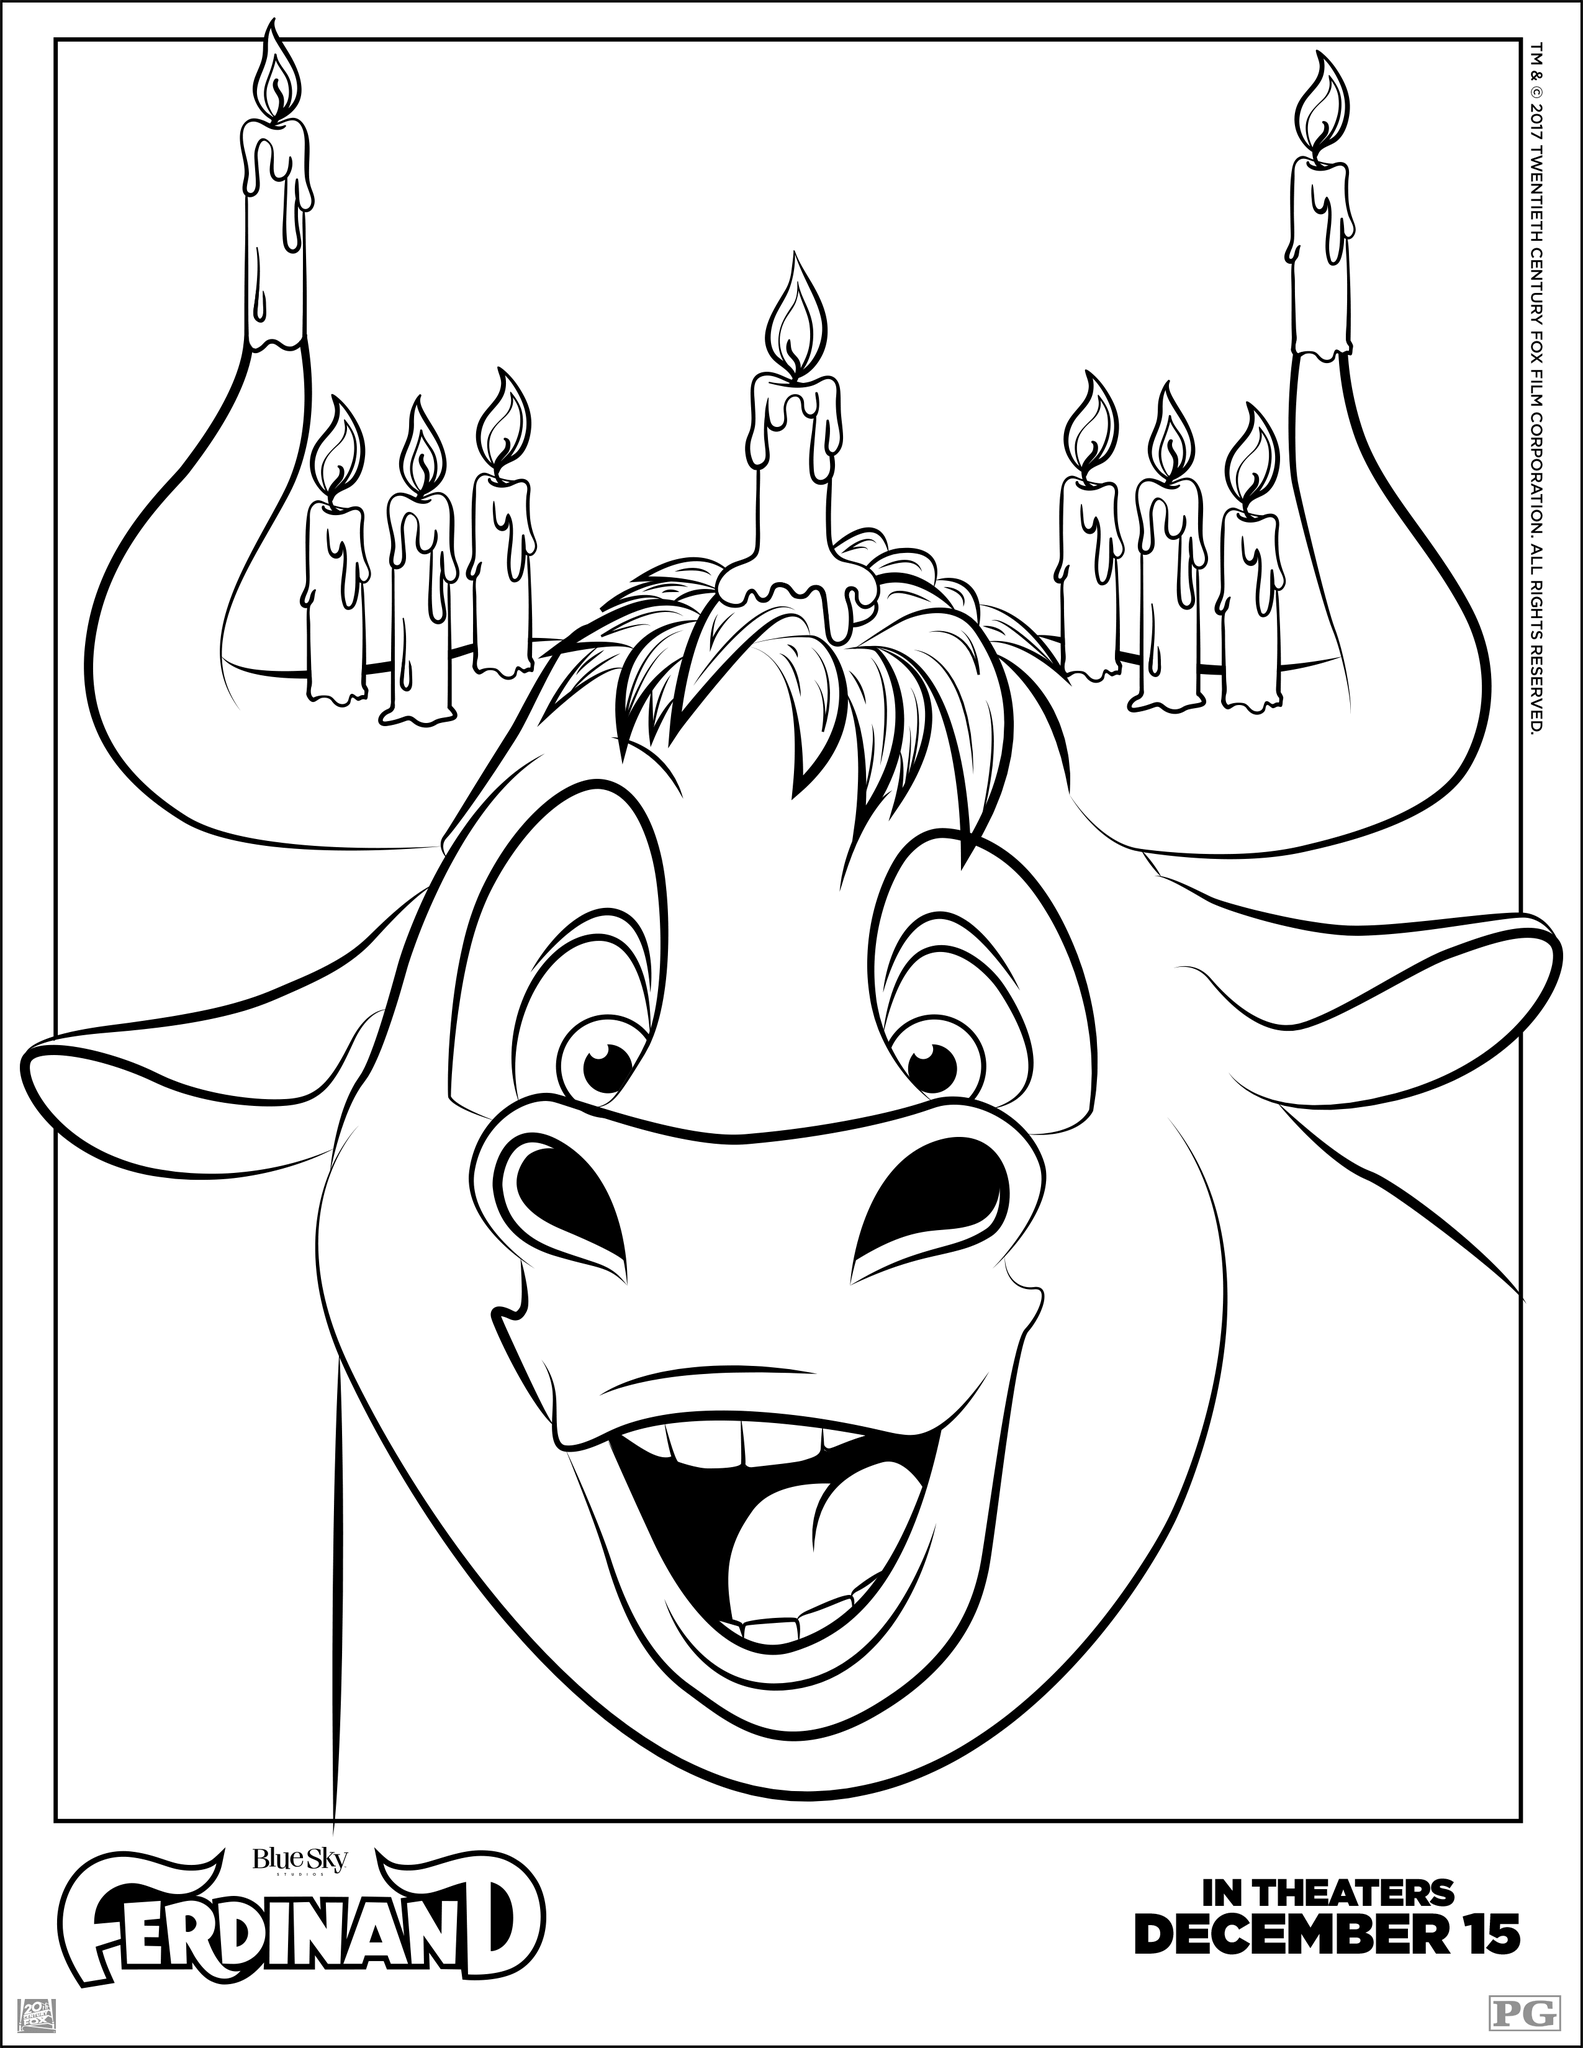 Ferdinand Coloring Pages - Best Coloring Pages For Kids